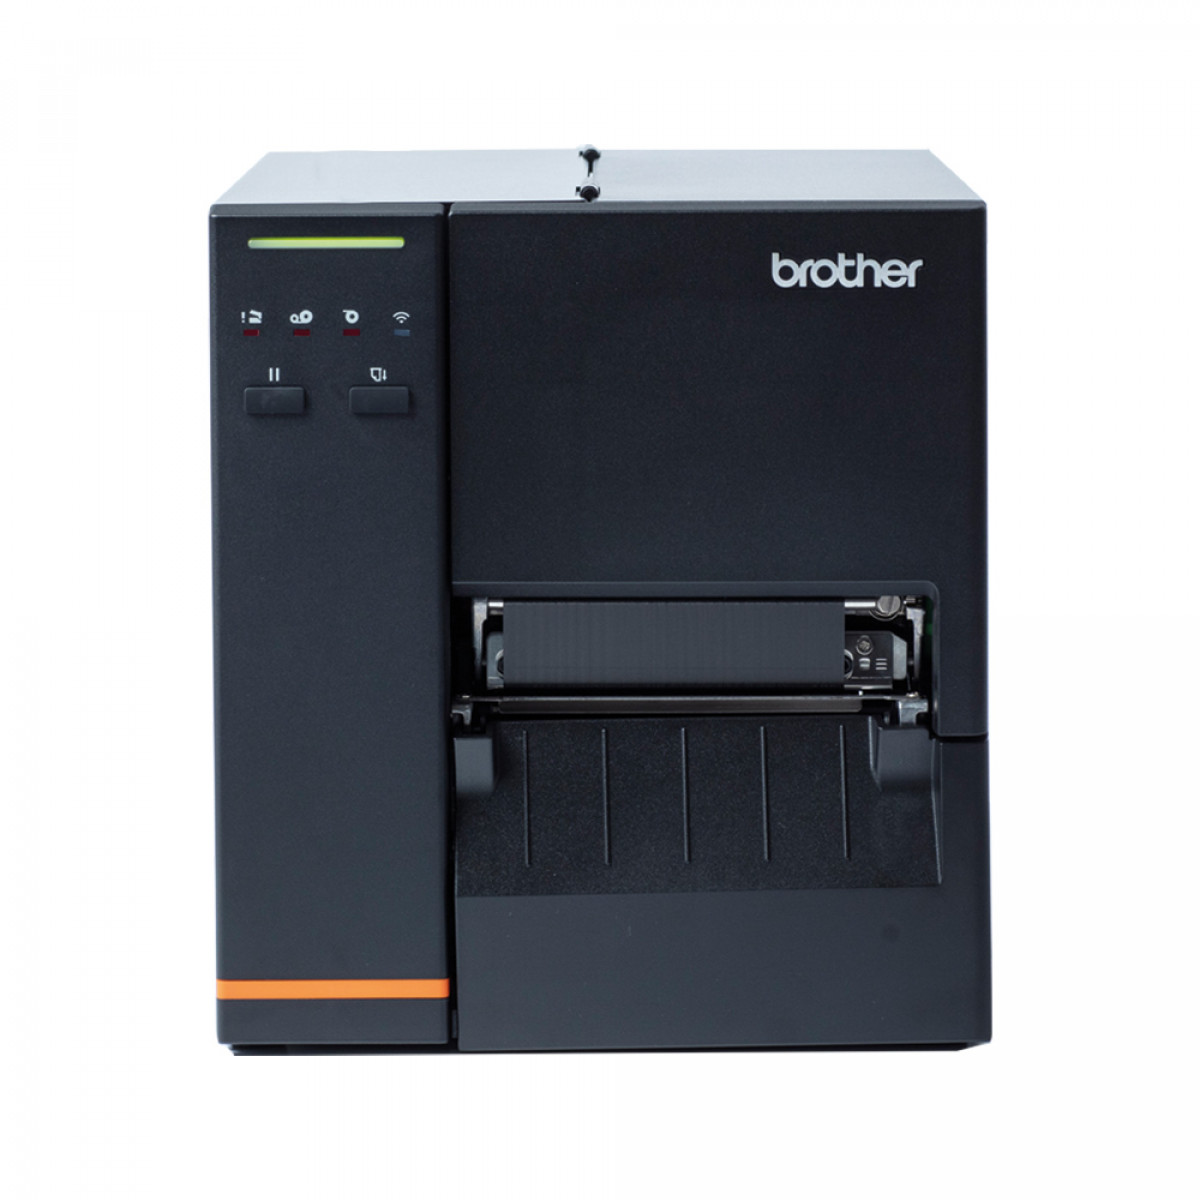 TJ4005DN Industrial Printer from Brother